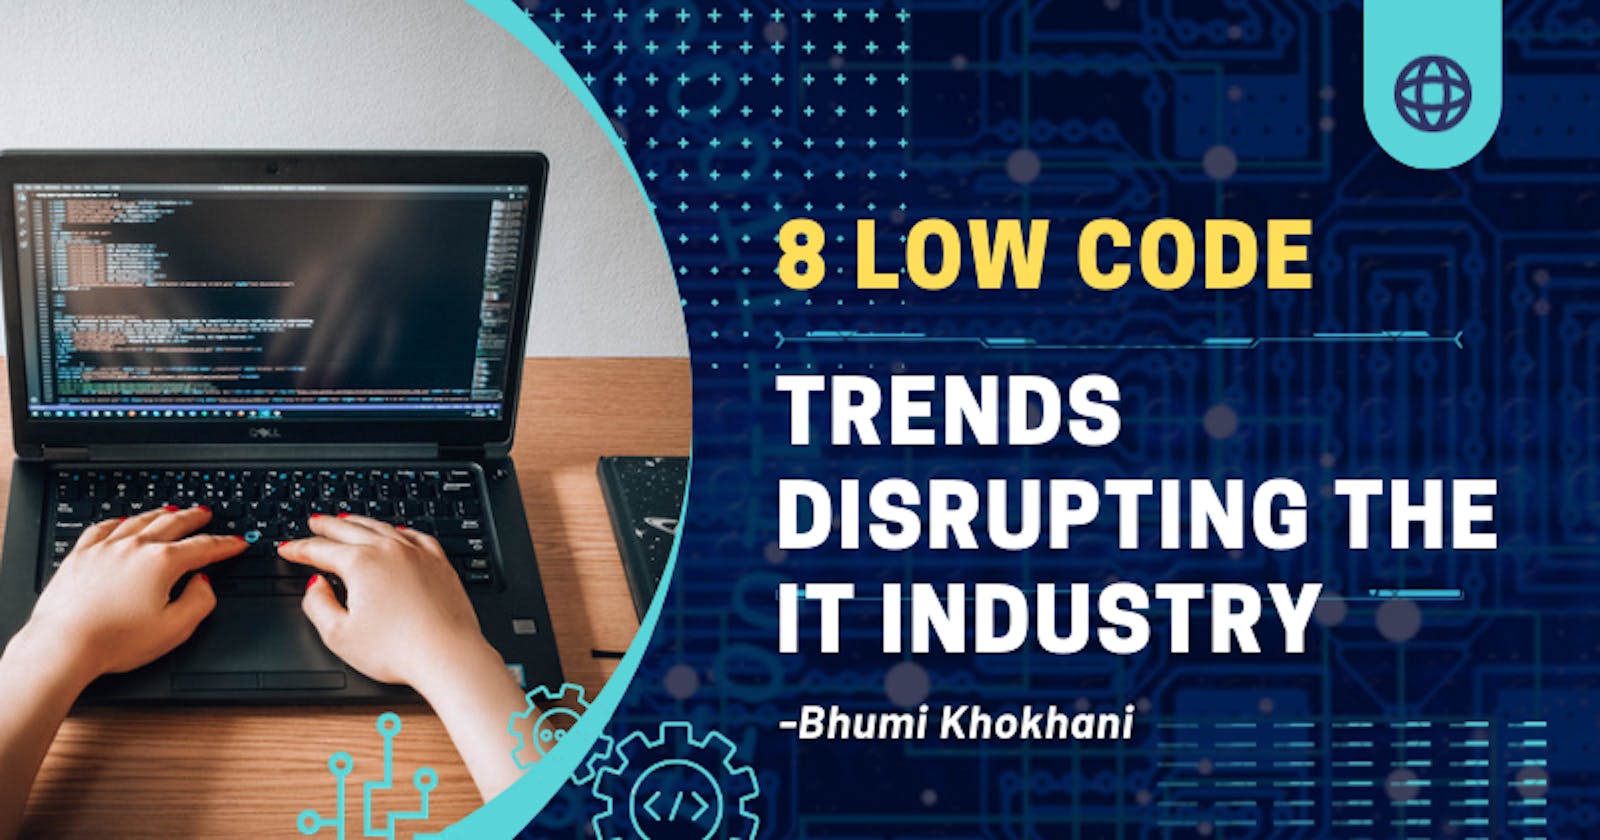 8 Low code trends disrupting the IT industry